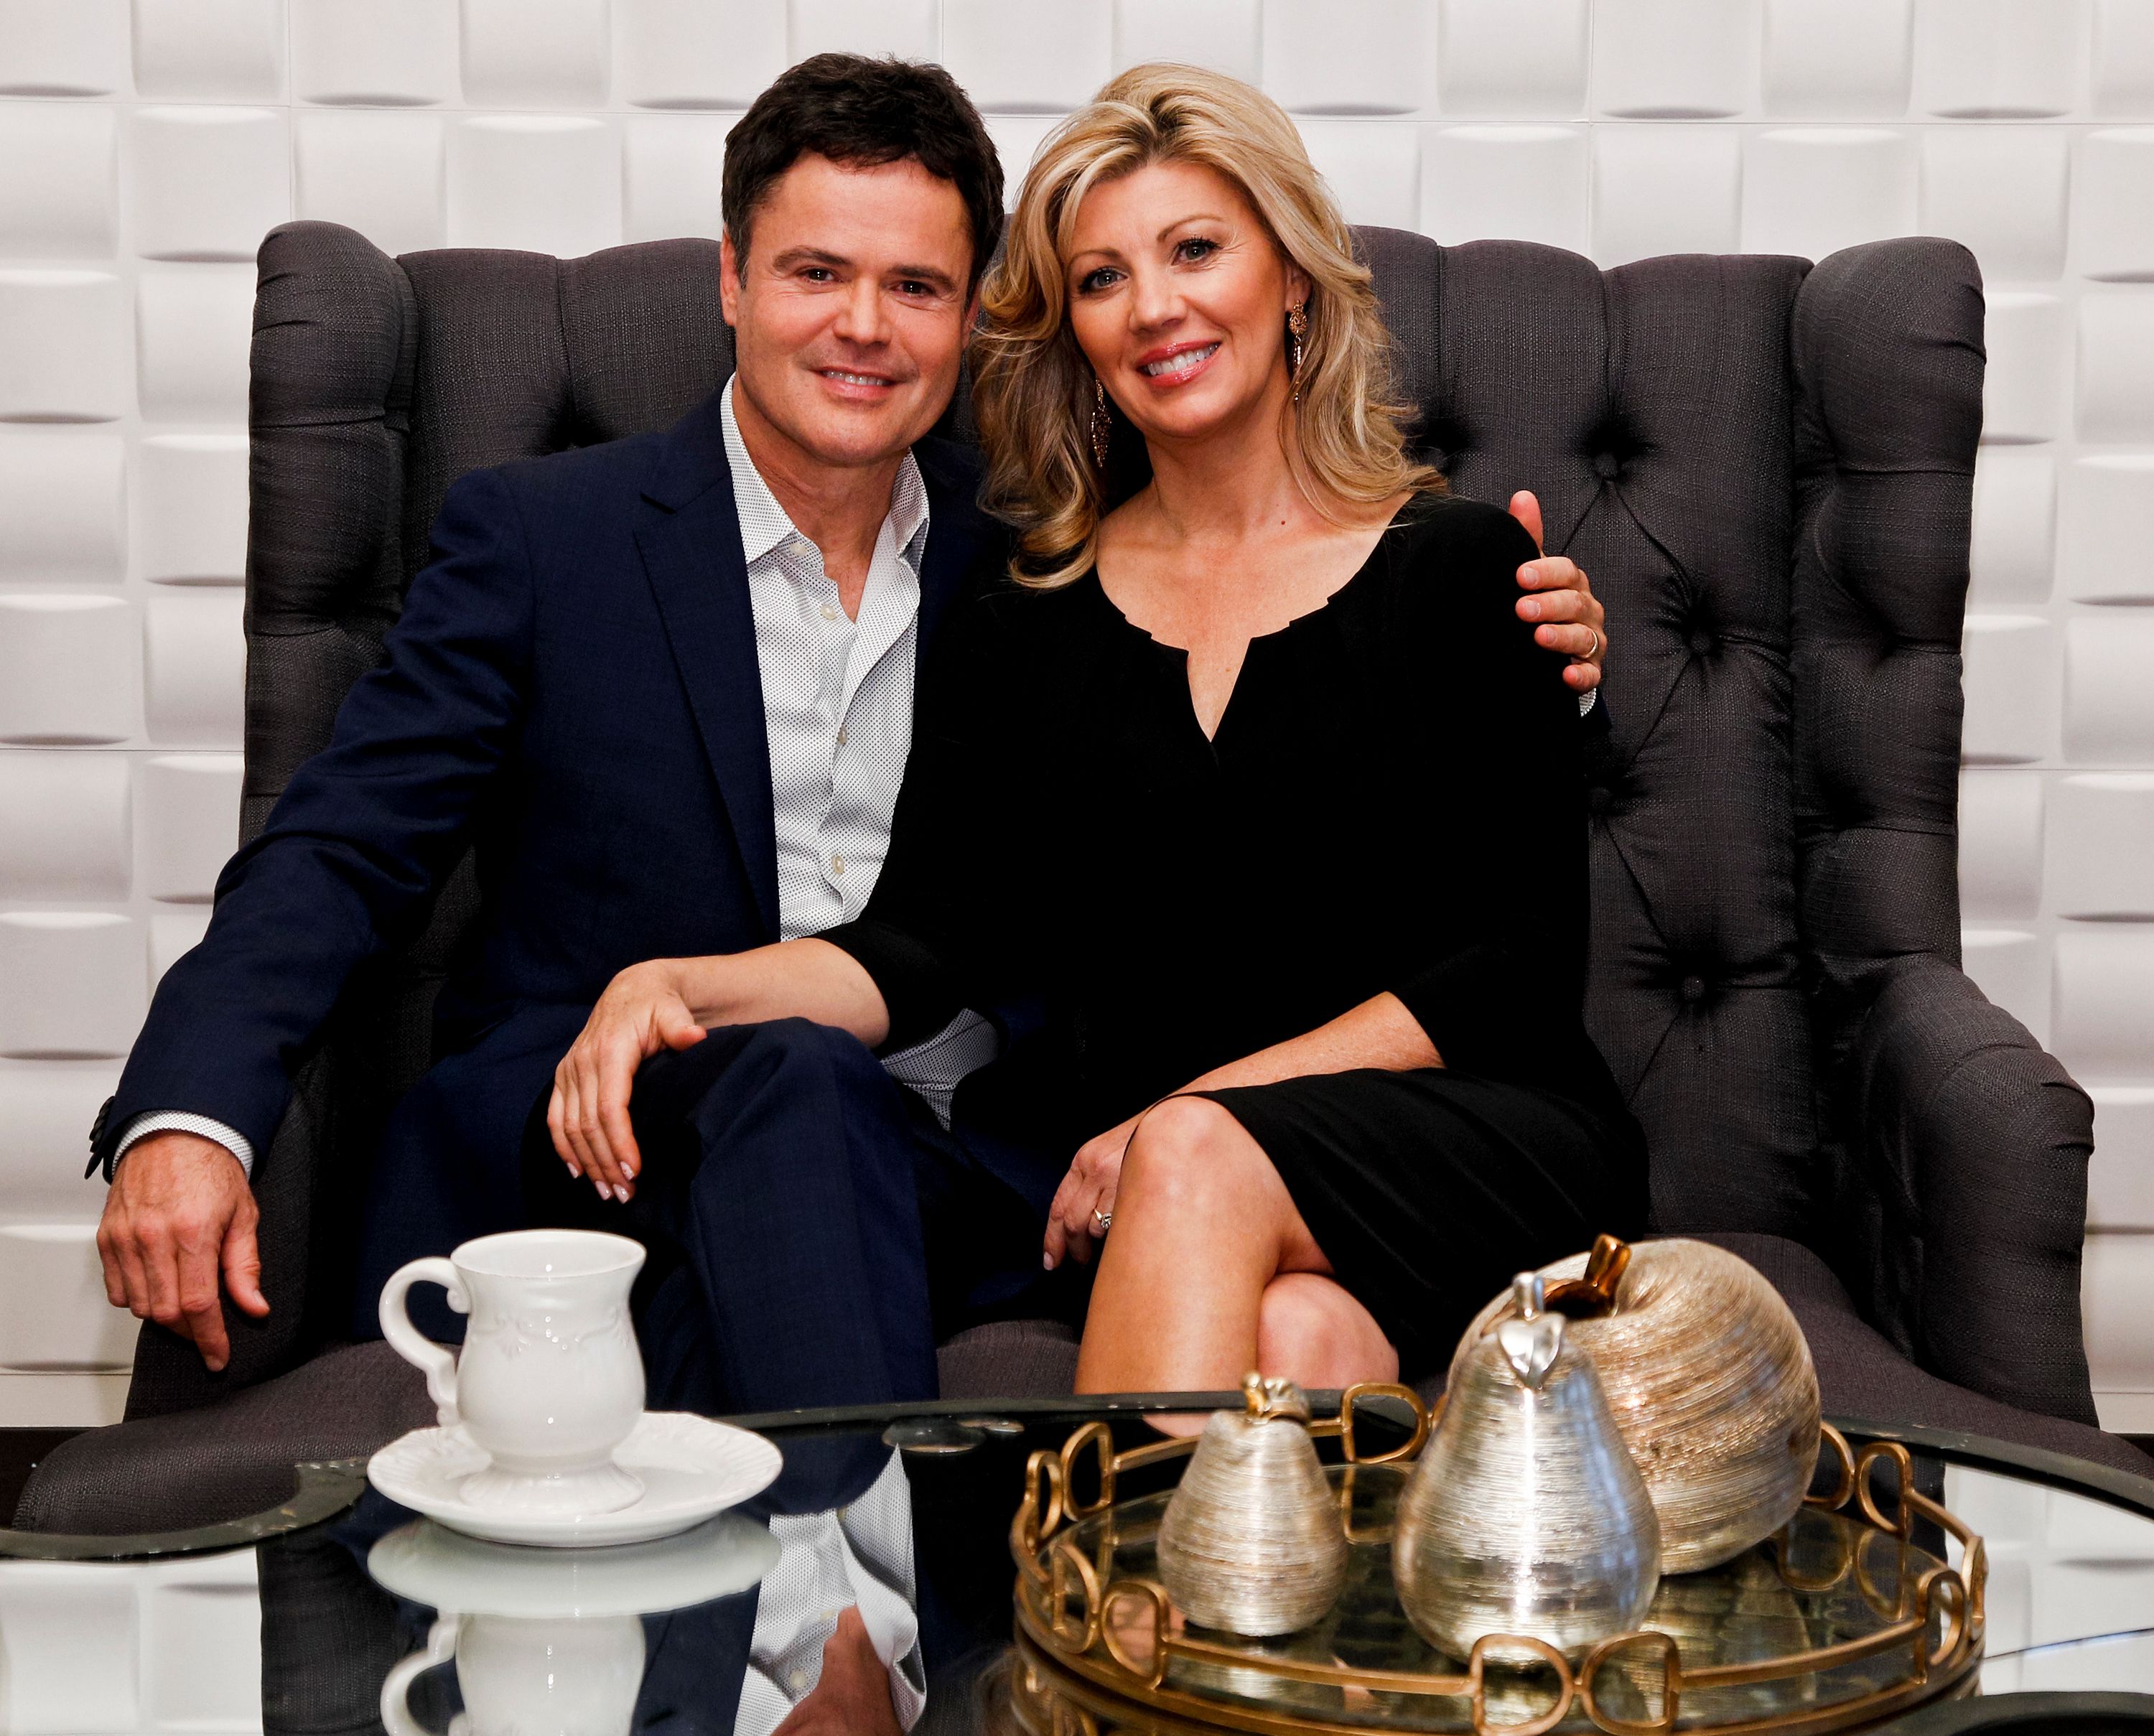 Donny and Debbie Osmond at the launch of Donny Osmond Home on September 23, 2013 | Photo: Getty Images